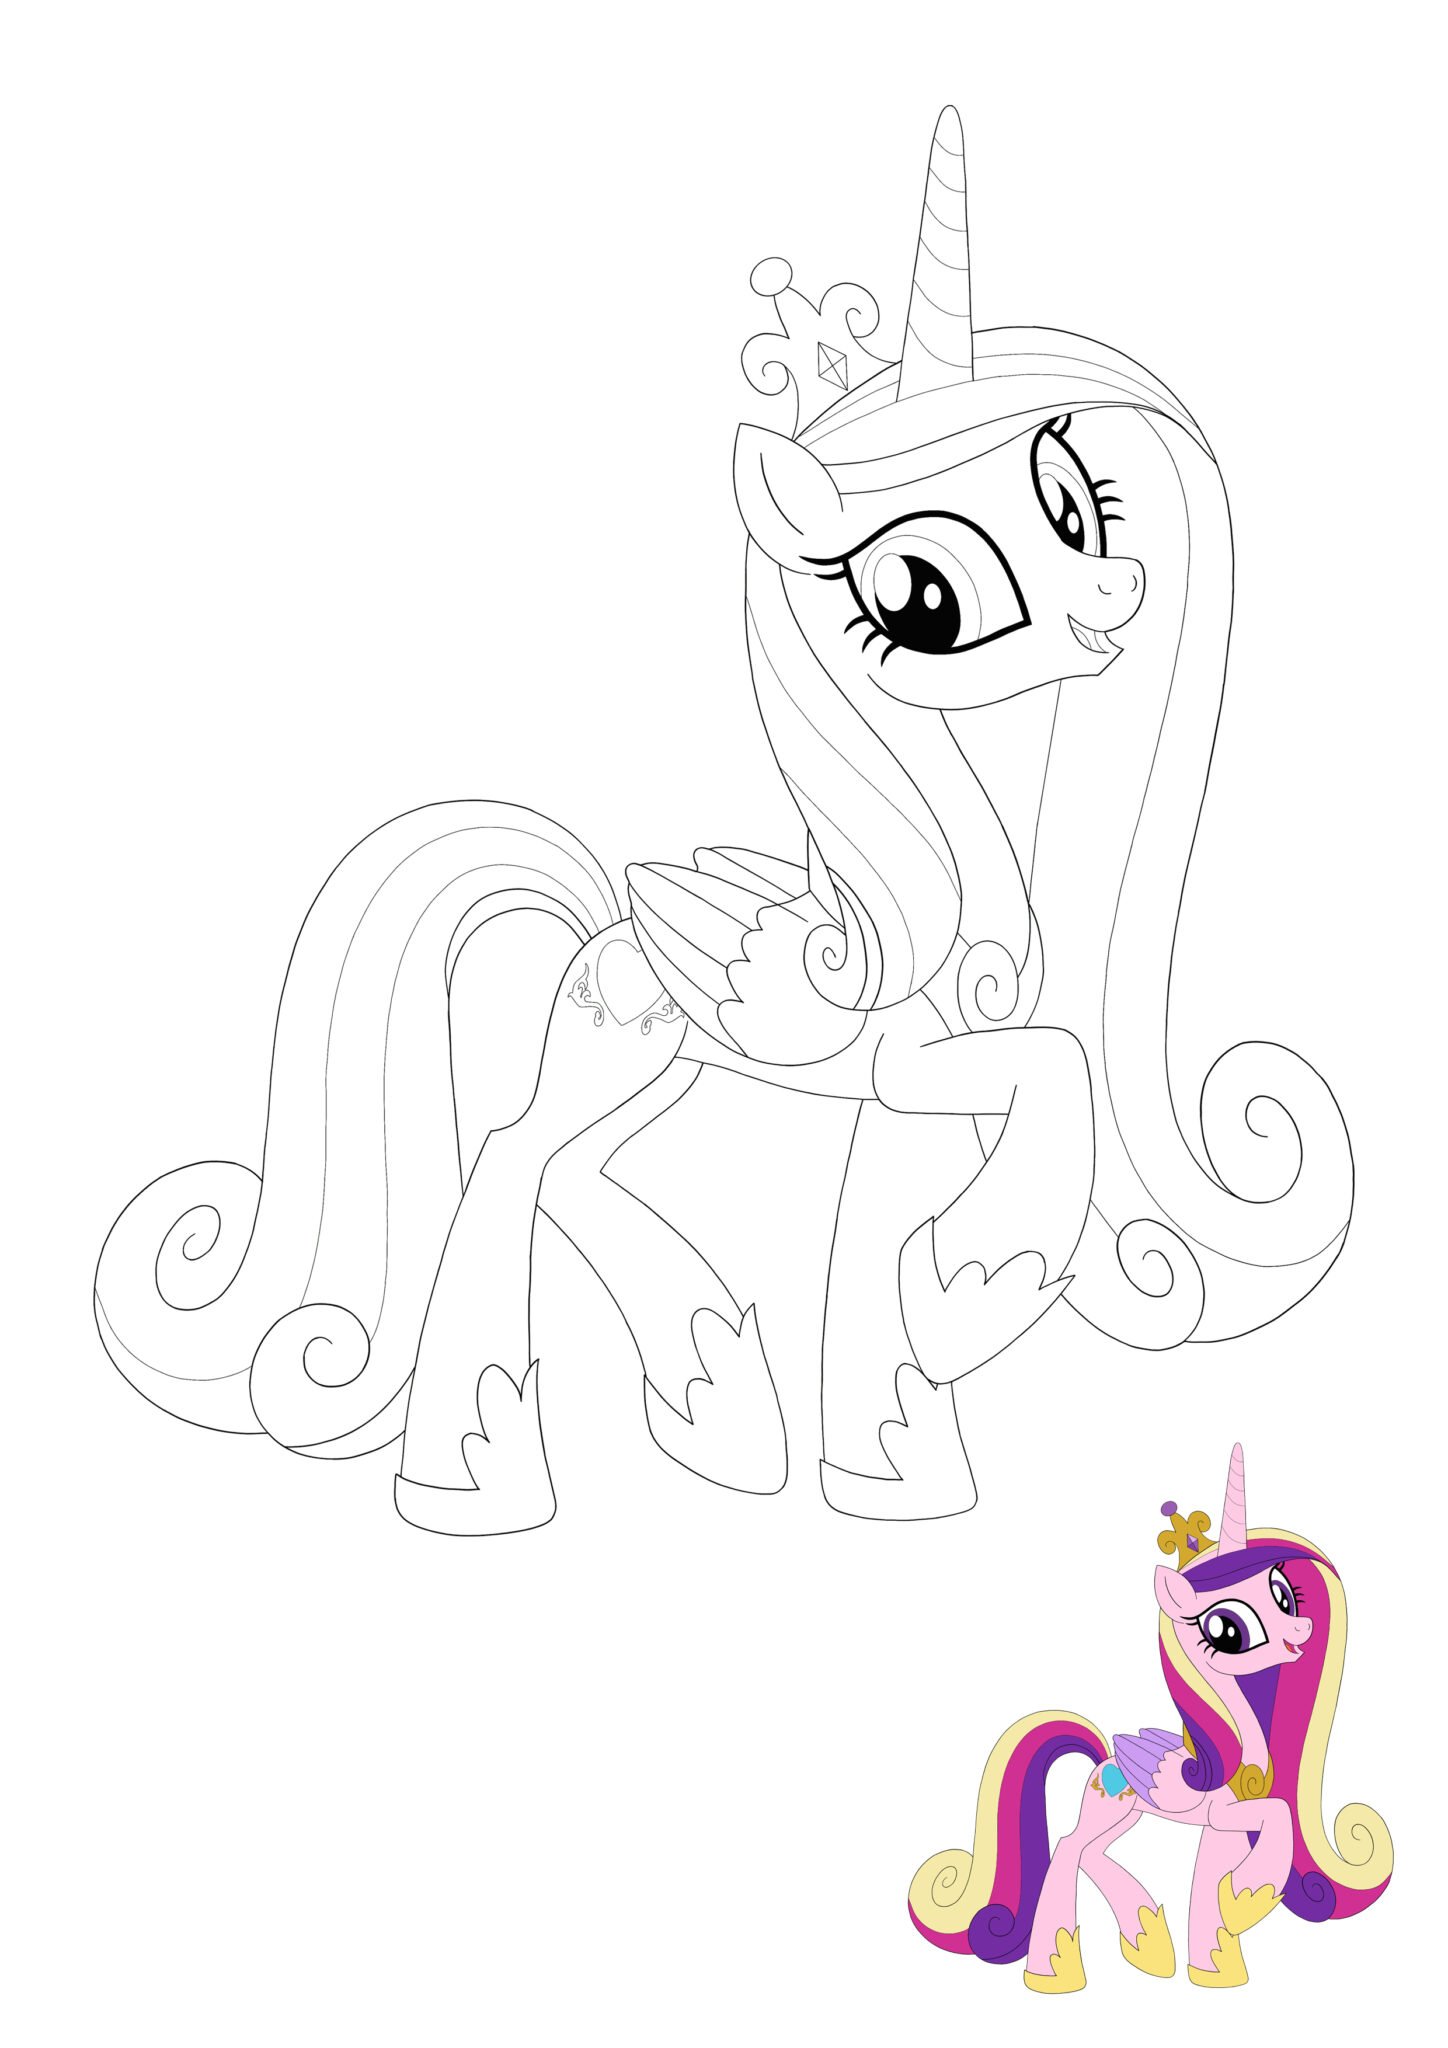 Princess Cadence coloring page with preview.